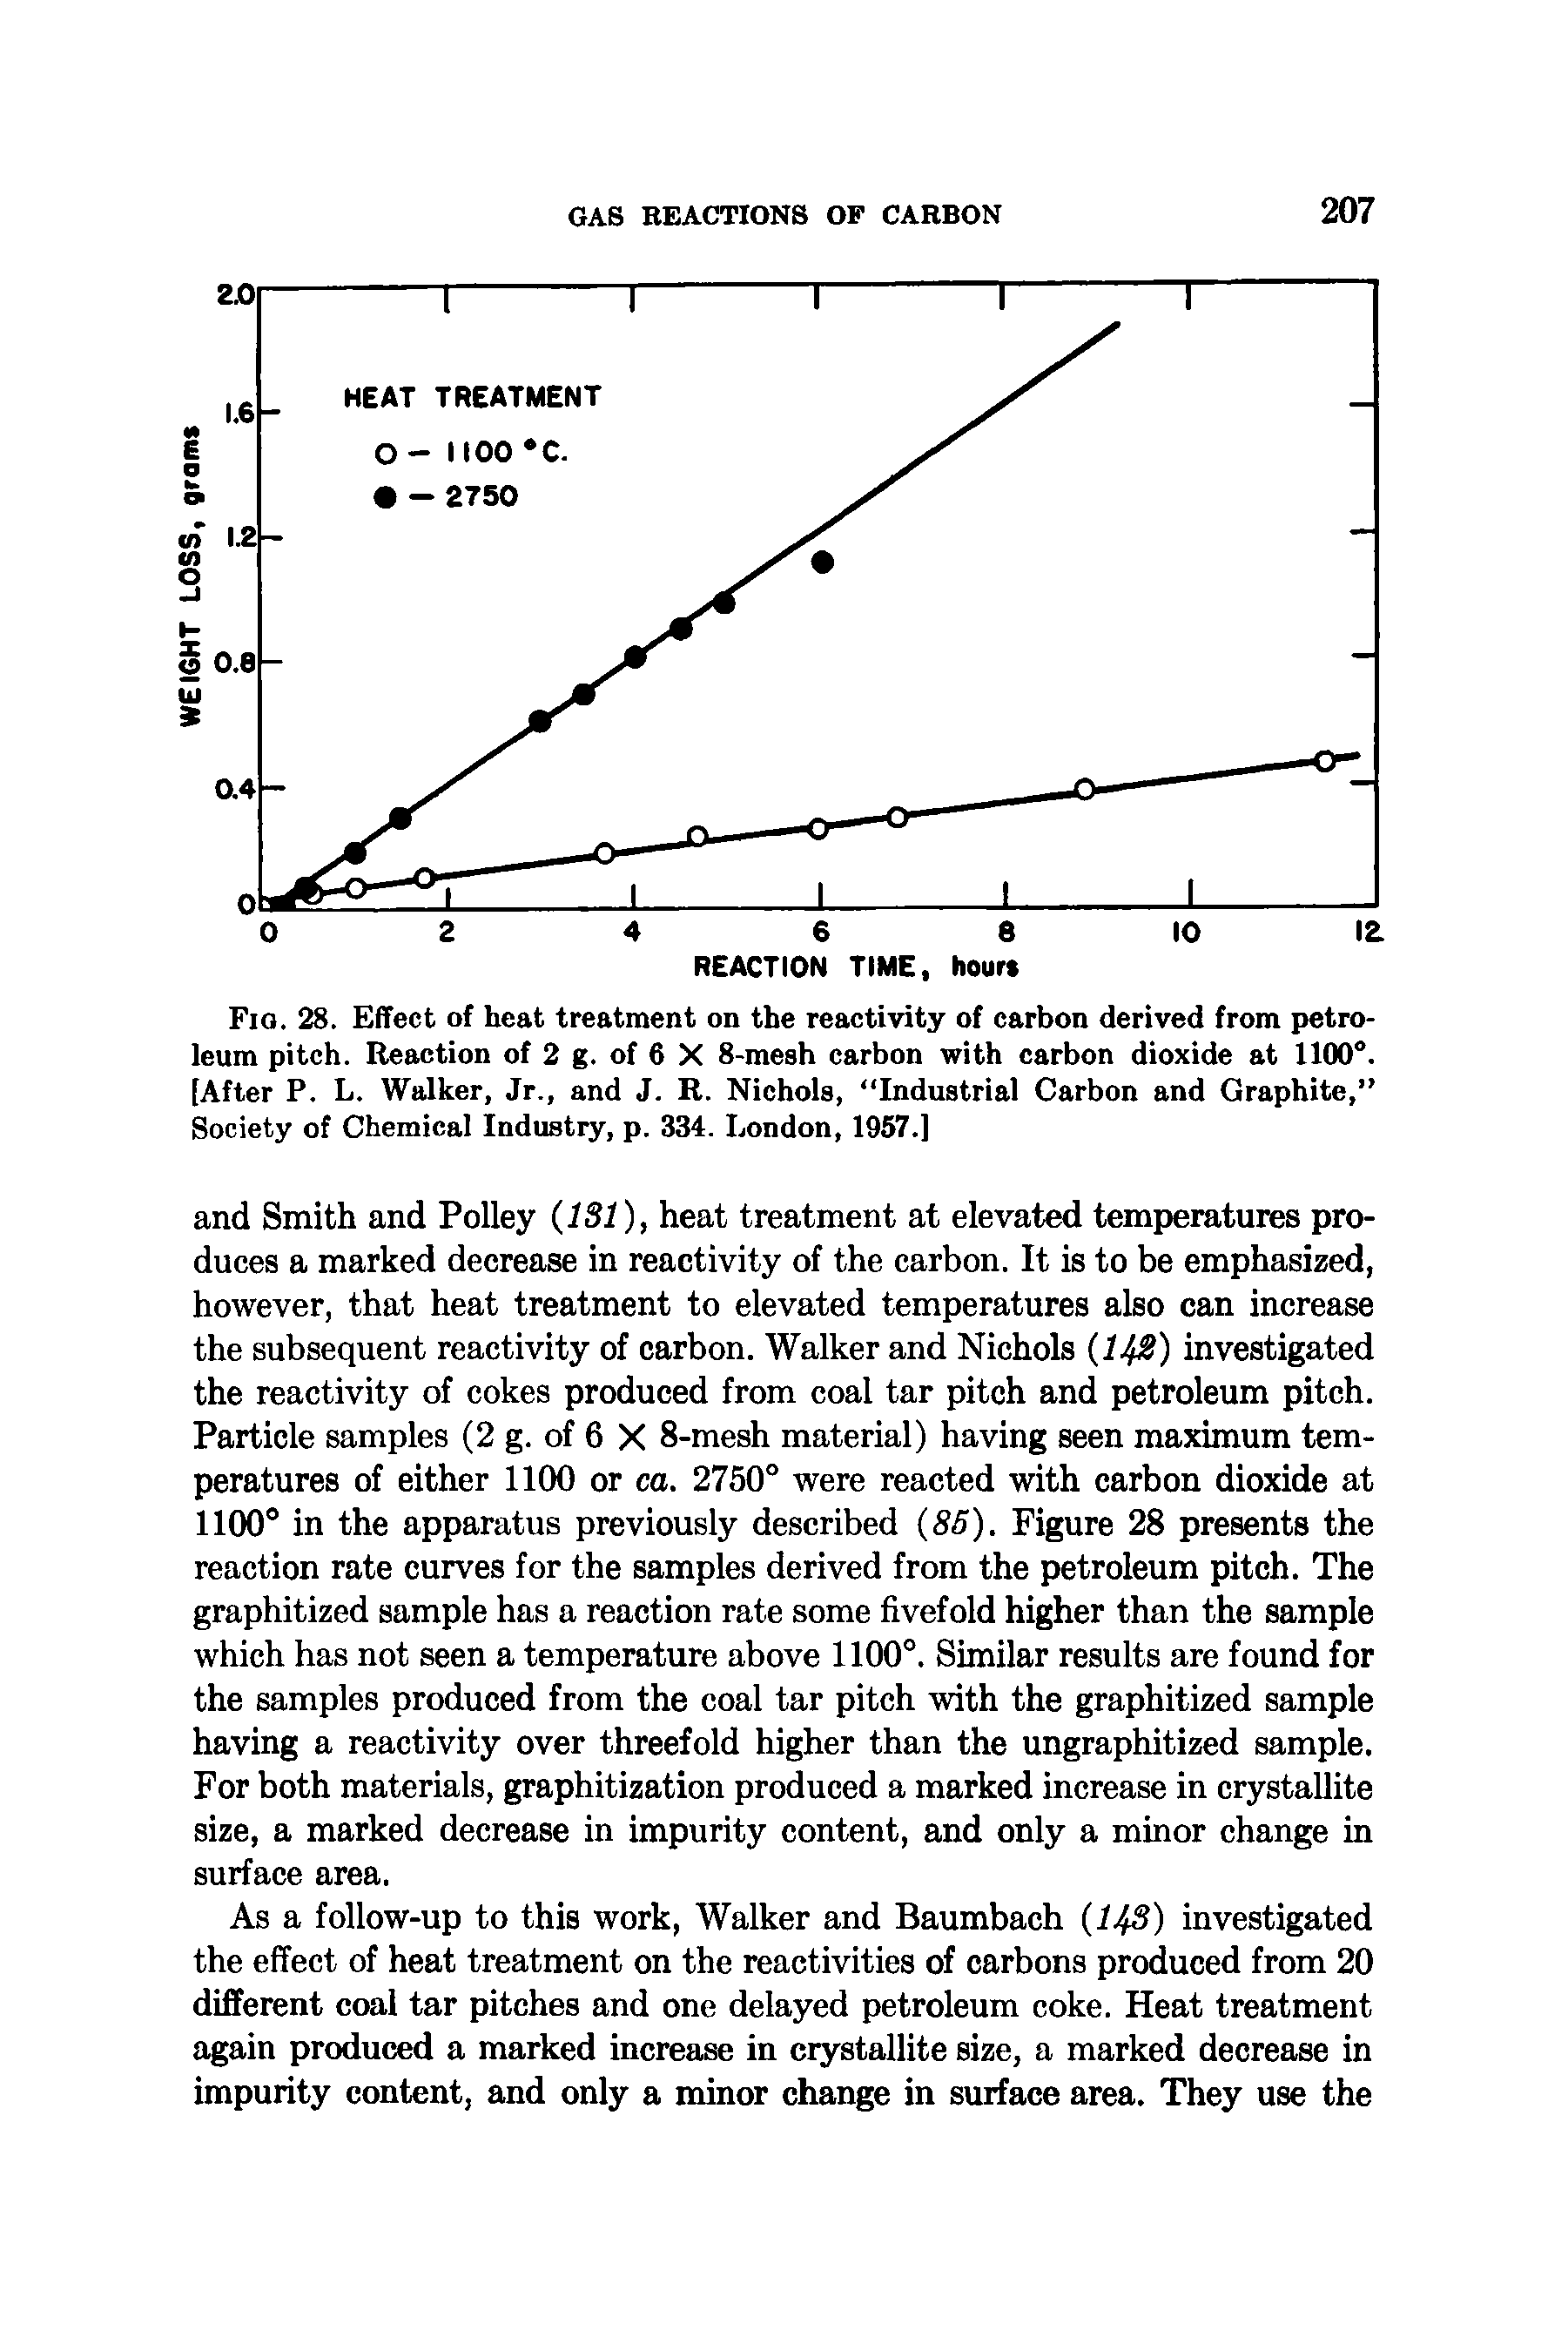 Fig. 28. Effect of heat treatment on the reactivity of carbon derived from petroleum pitch. Reaction of 2 g. of 6 X 8-mesh carbon with carbon dioxide at 1100°. [After P. L. Walker, Jr., and J. R. Nichols, Industrial Carbon and Graphite, Society of Chemical Industry, p. 334. London, 1957.]...